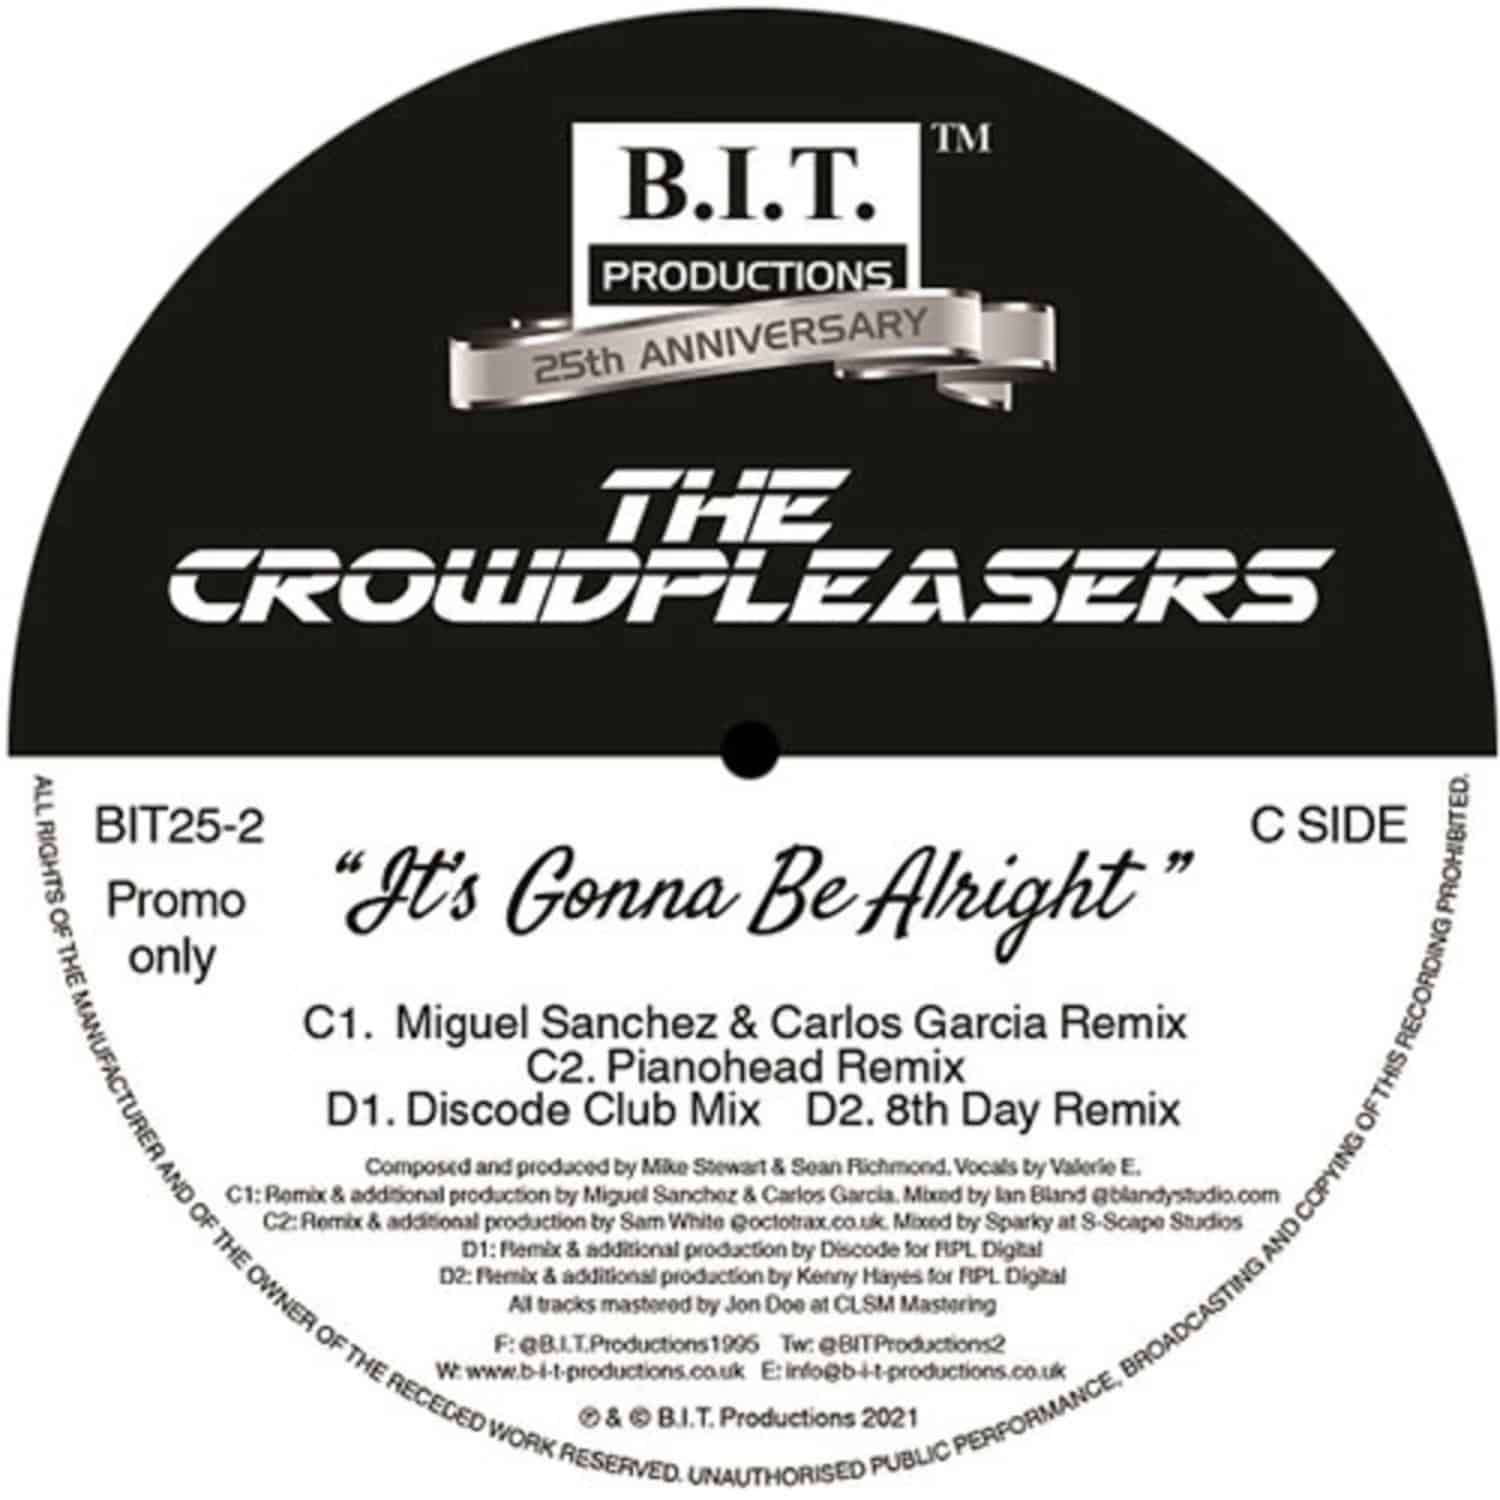 The Crowdpleasers - ITS GONNA BE ALRIGHT PART - 2